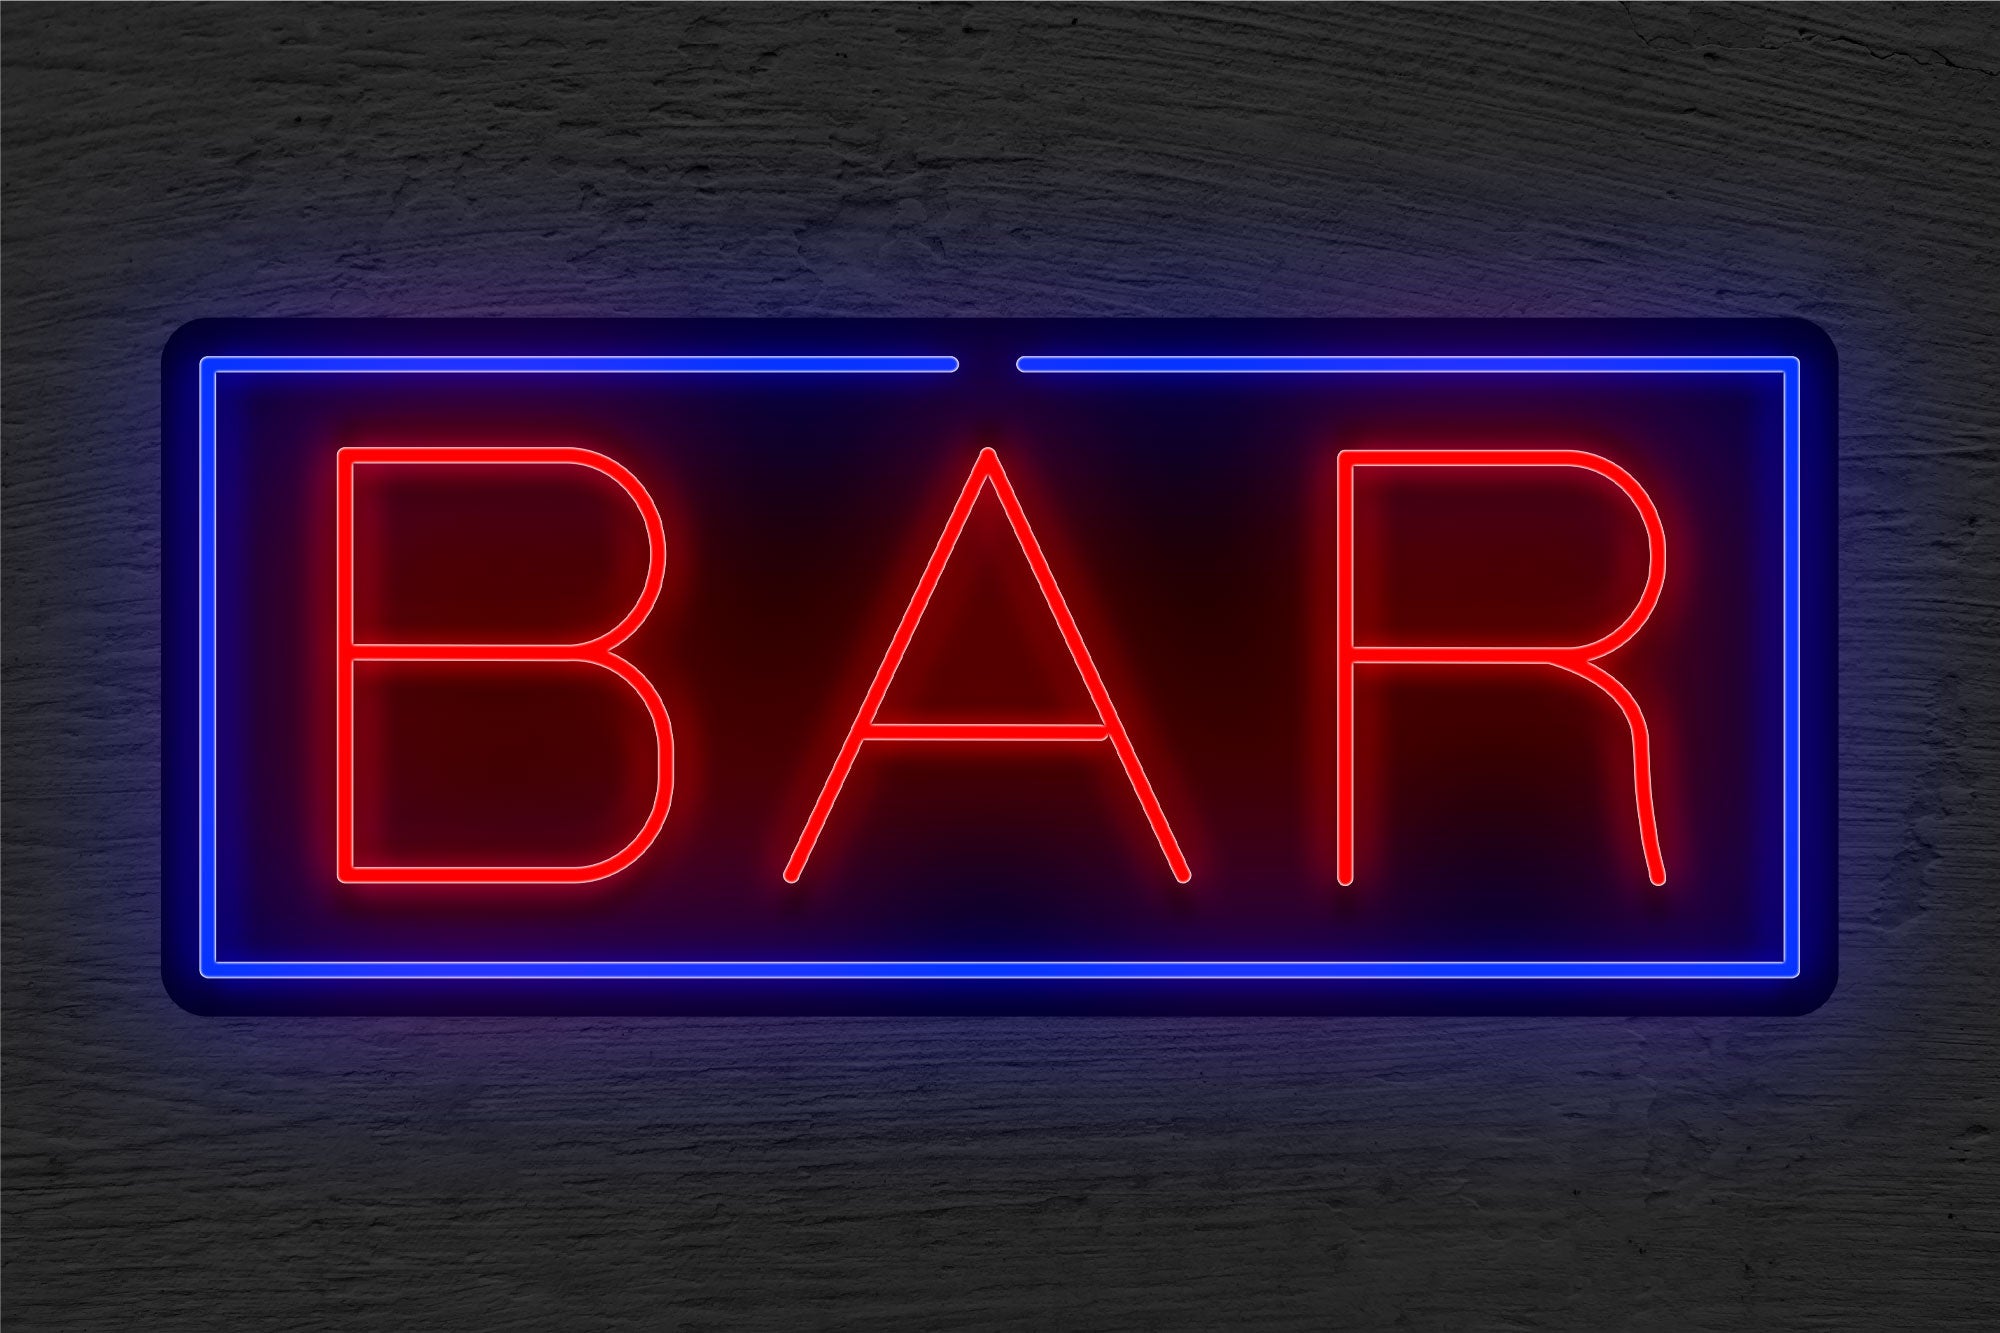 "BAR" with Blue Border LED Neon Sign